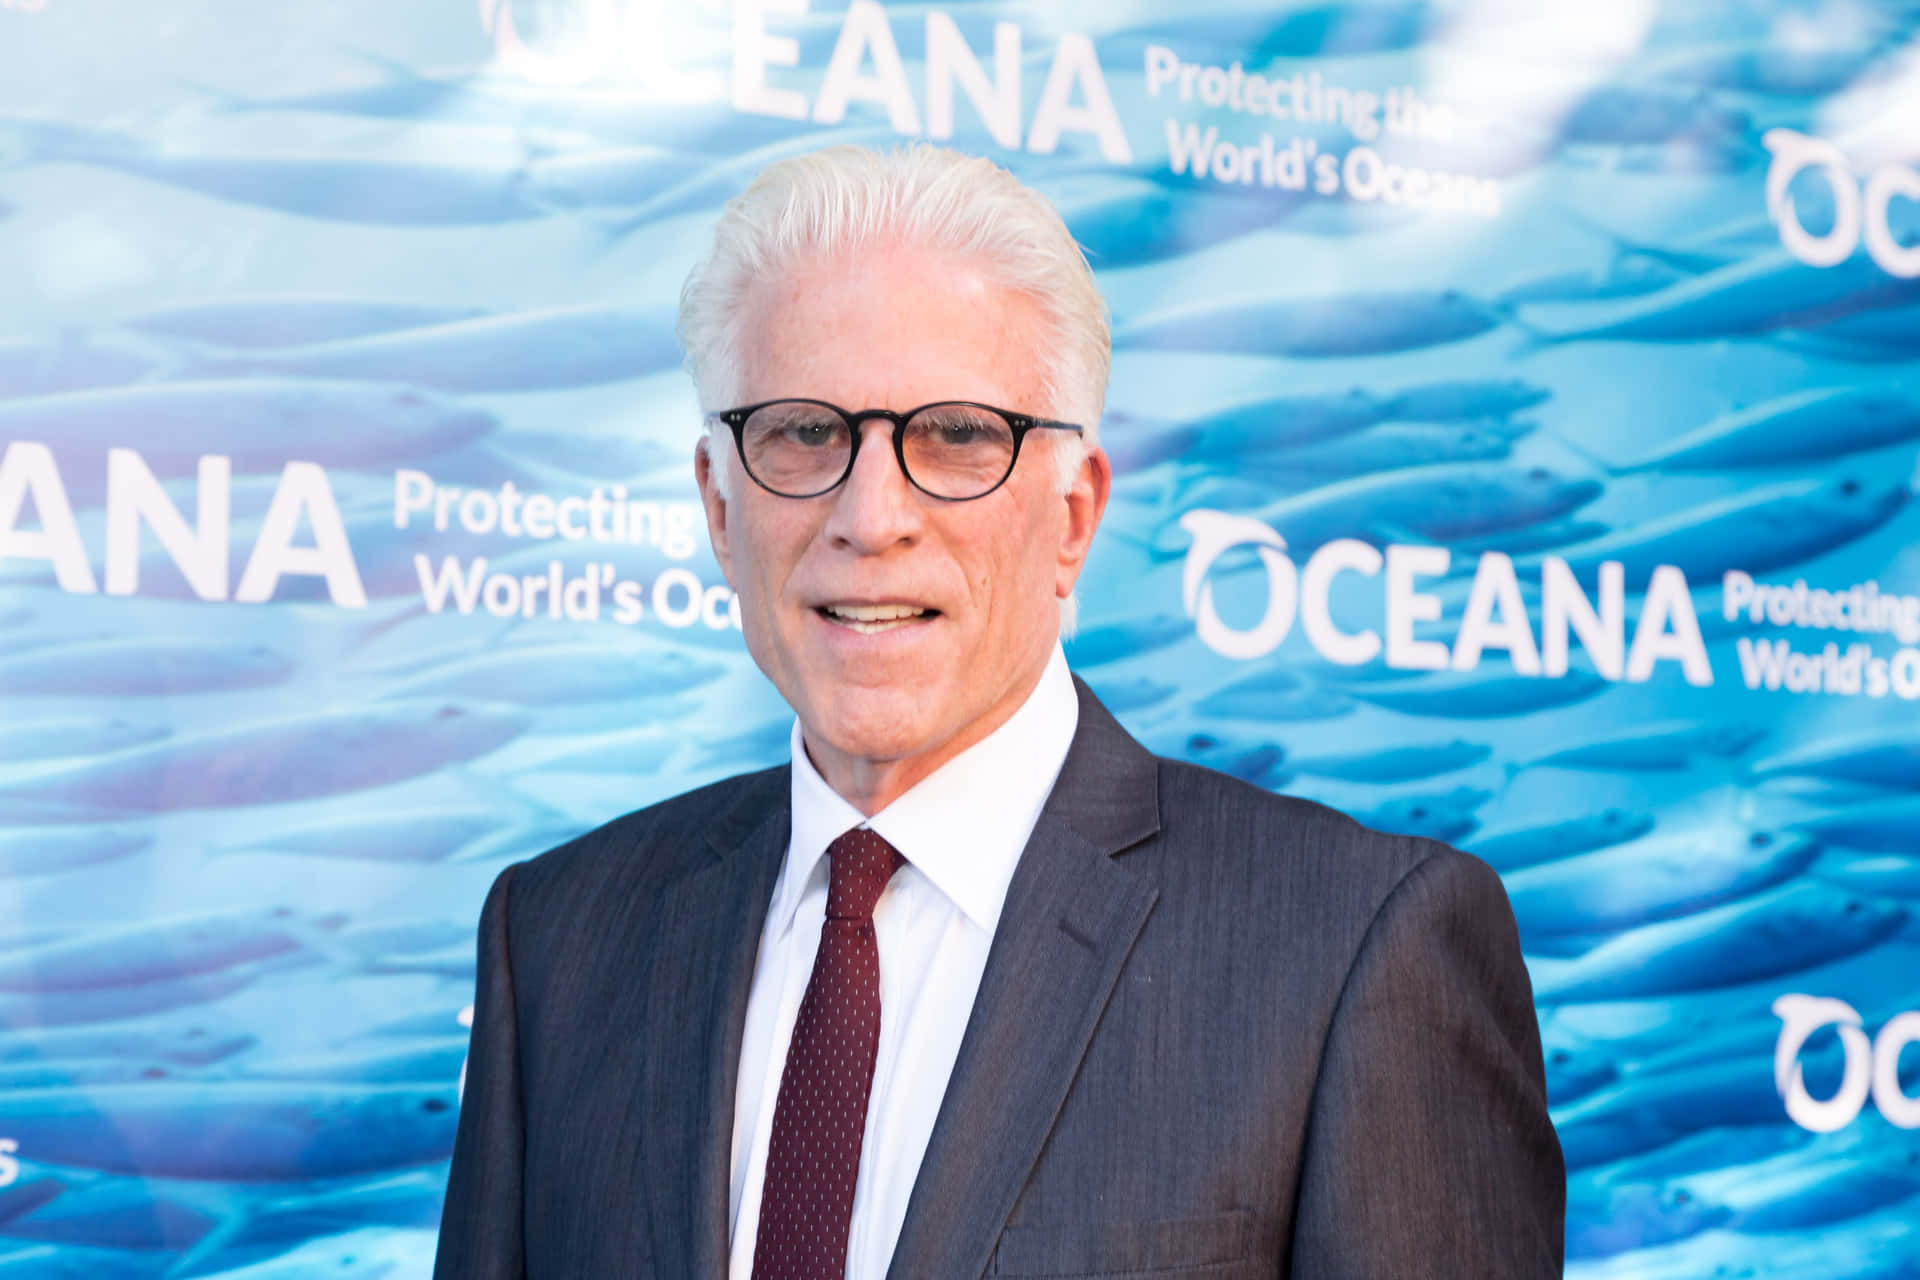 Actor Ted Danson looking pensive on the beach" Wallpaper